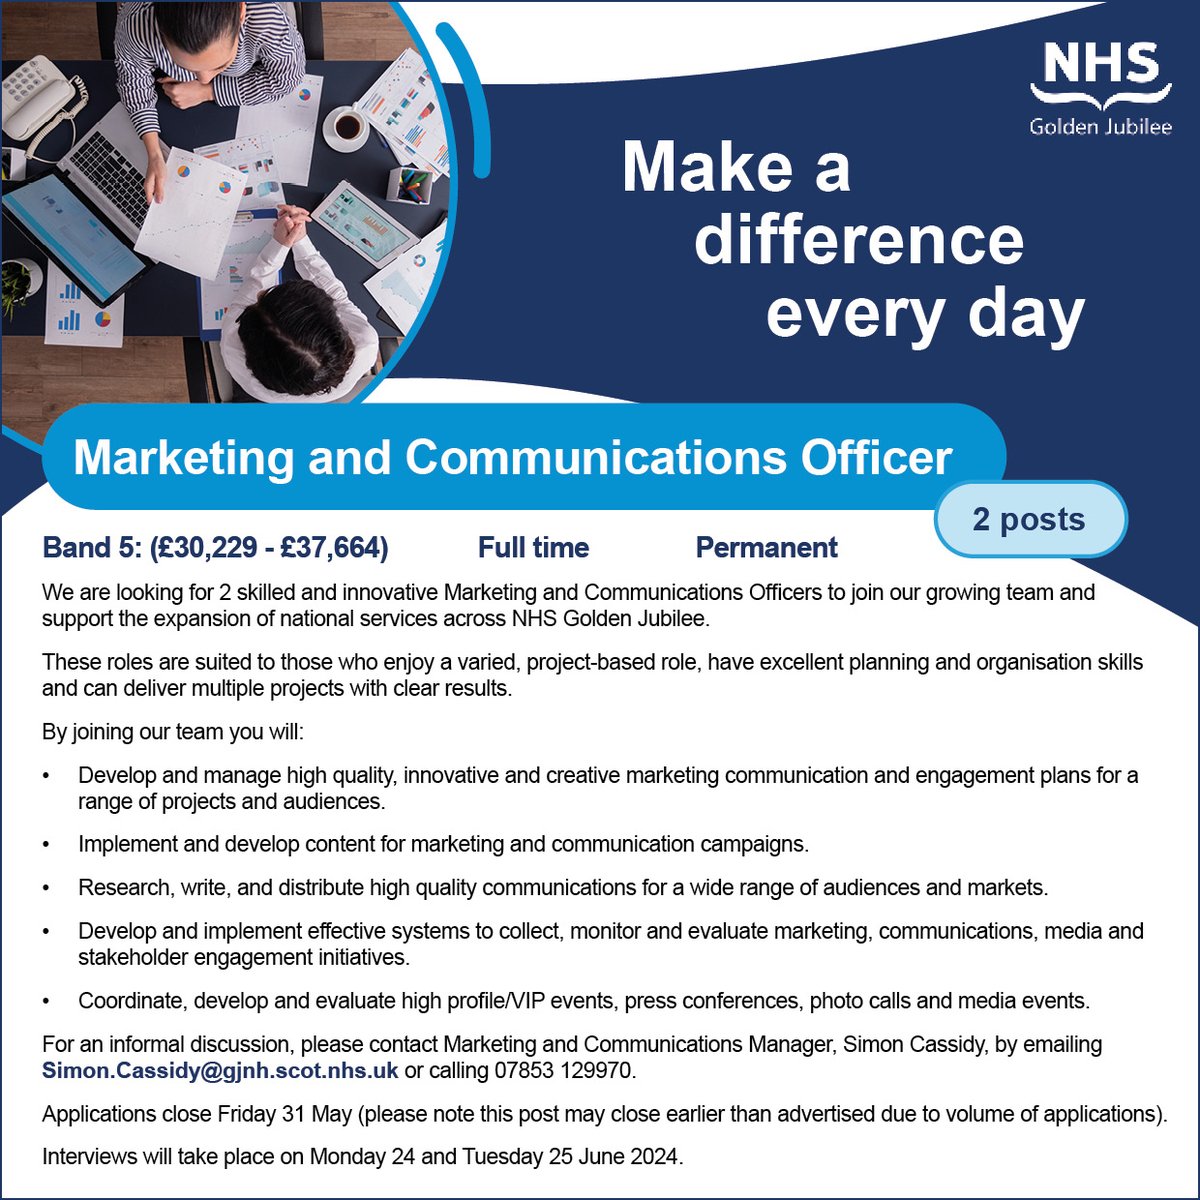 #JobAlert We have a fantastic opportunity for 2 Marketing and Communications Officers to join our dedicated team! These hands-on roles will help plan and implement marketing, communication and engagement strategies across our organisation. Apply now👉 apply.jobs.scot.nhs.uk/Job/JobDetail?…